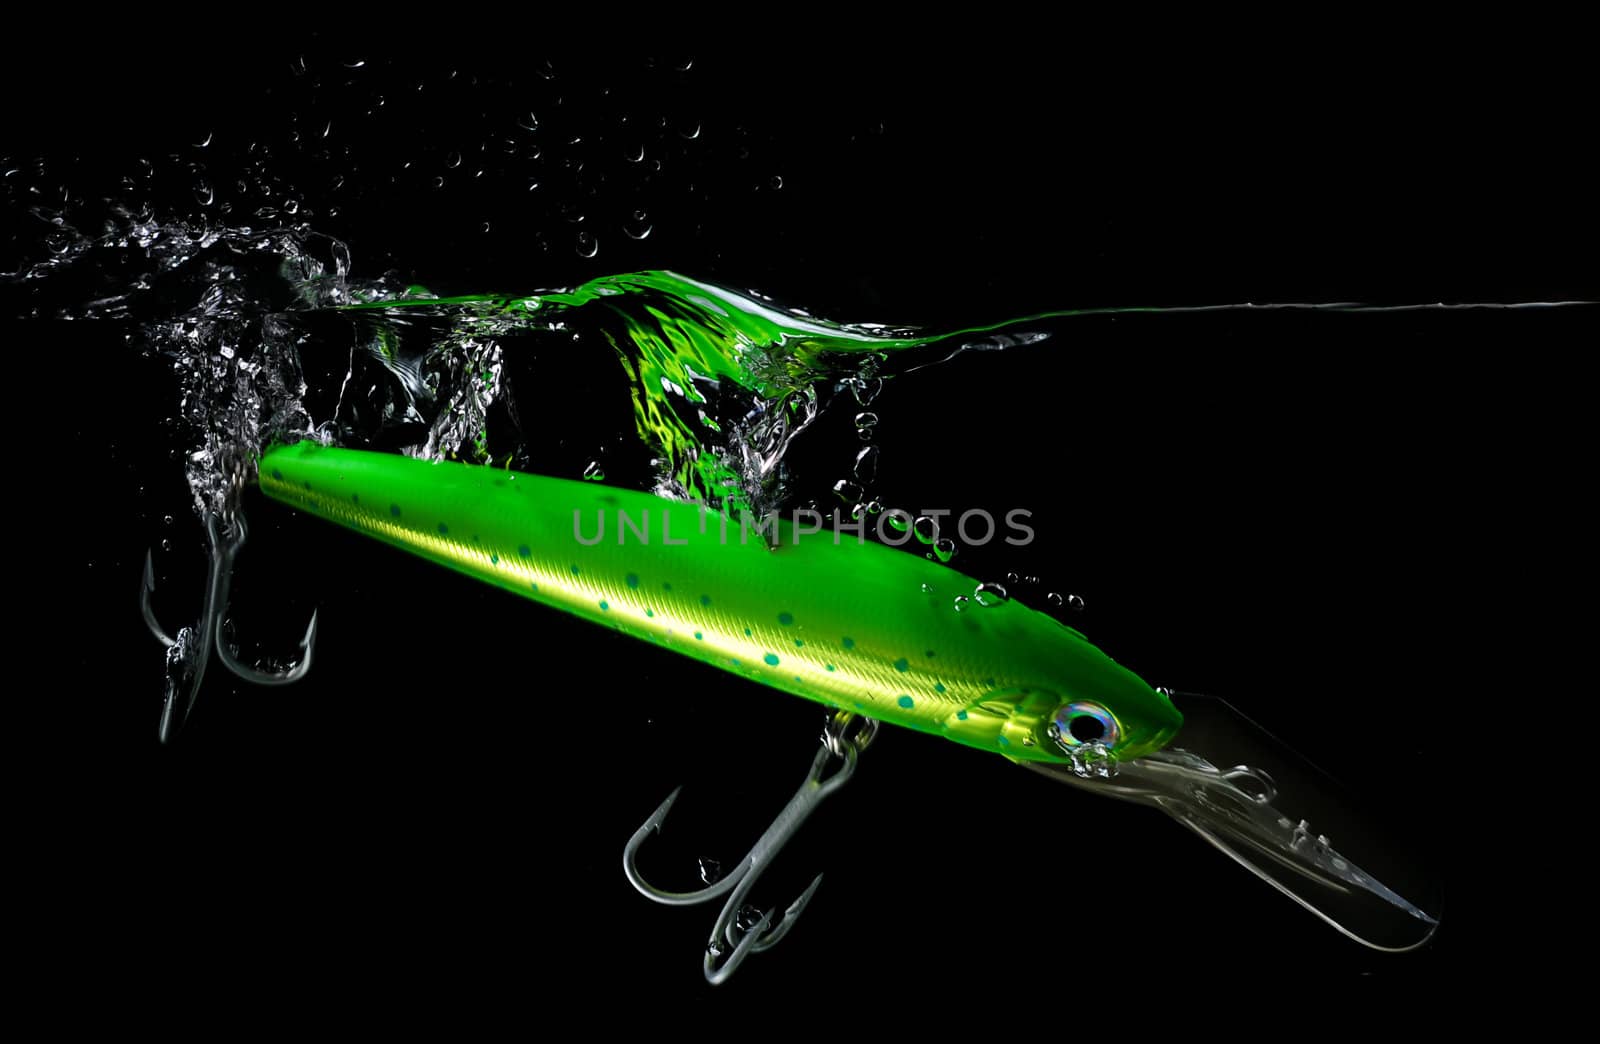 Green lure making a splash in water on black background